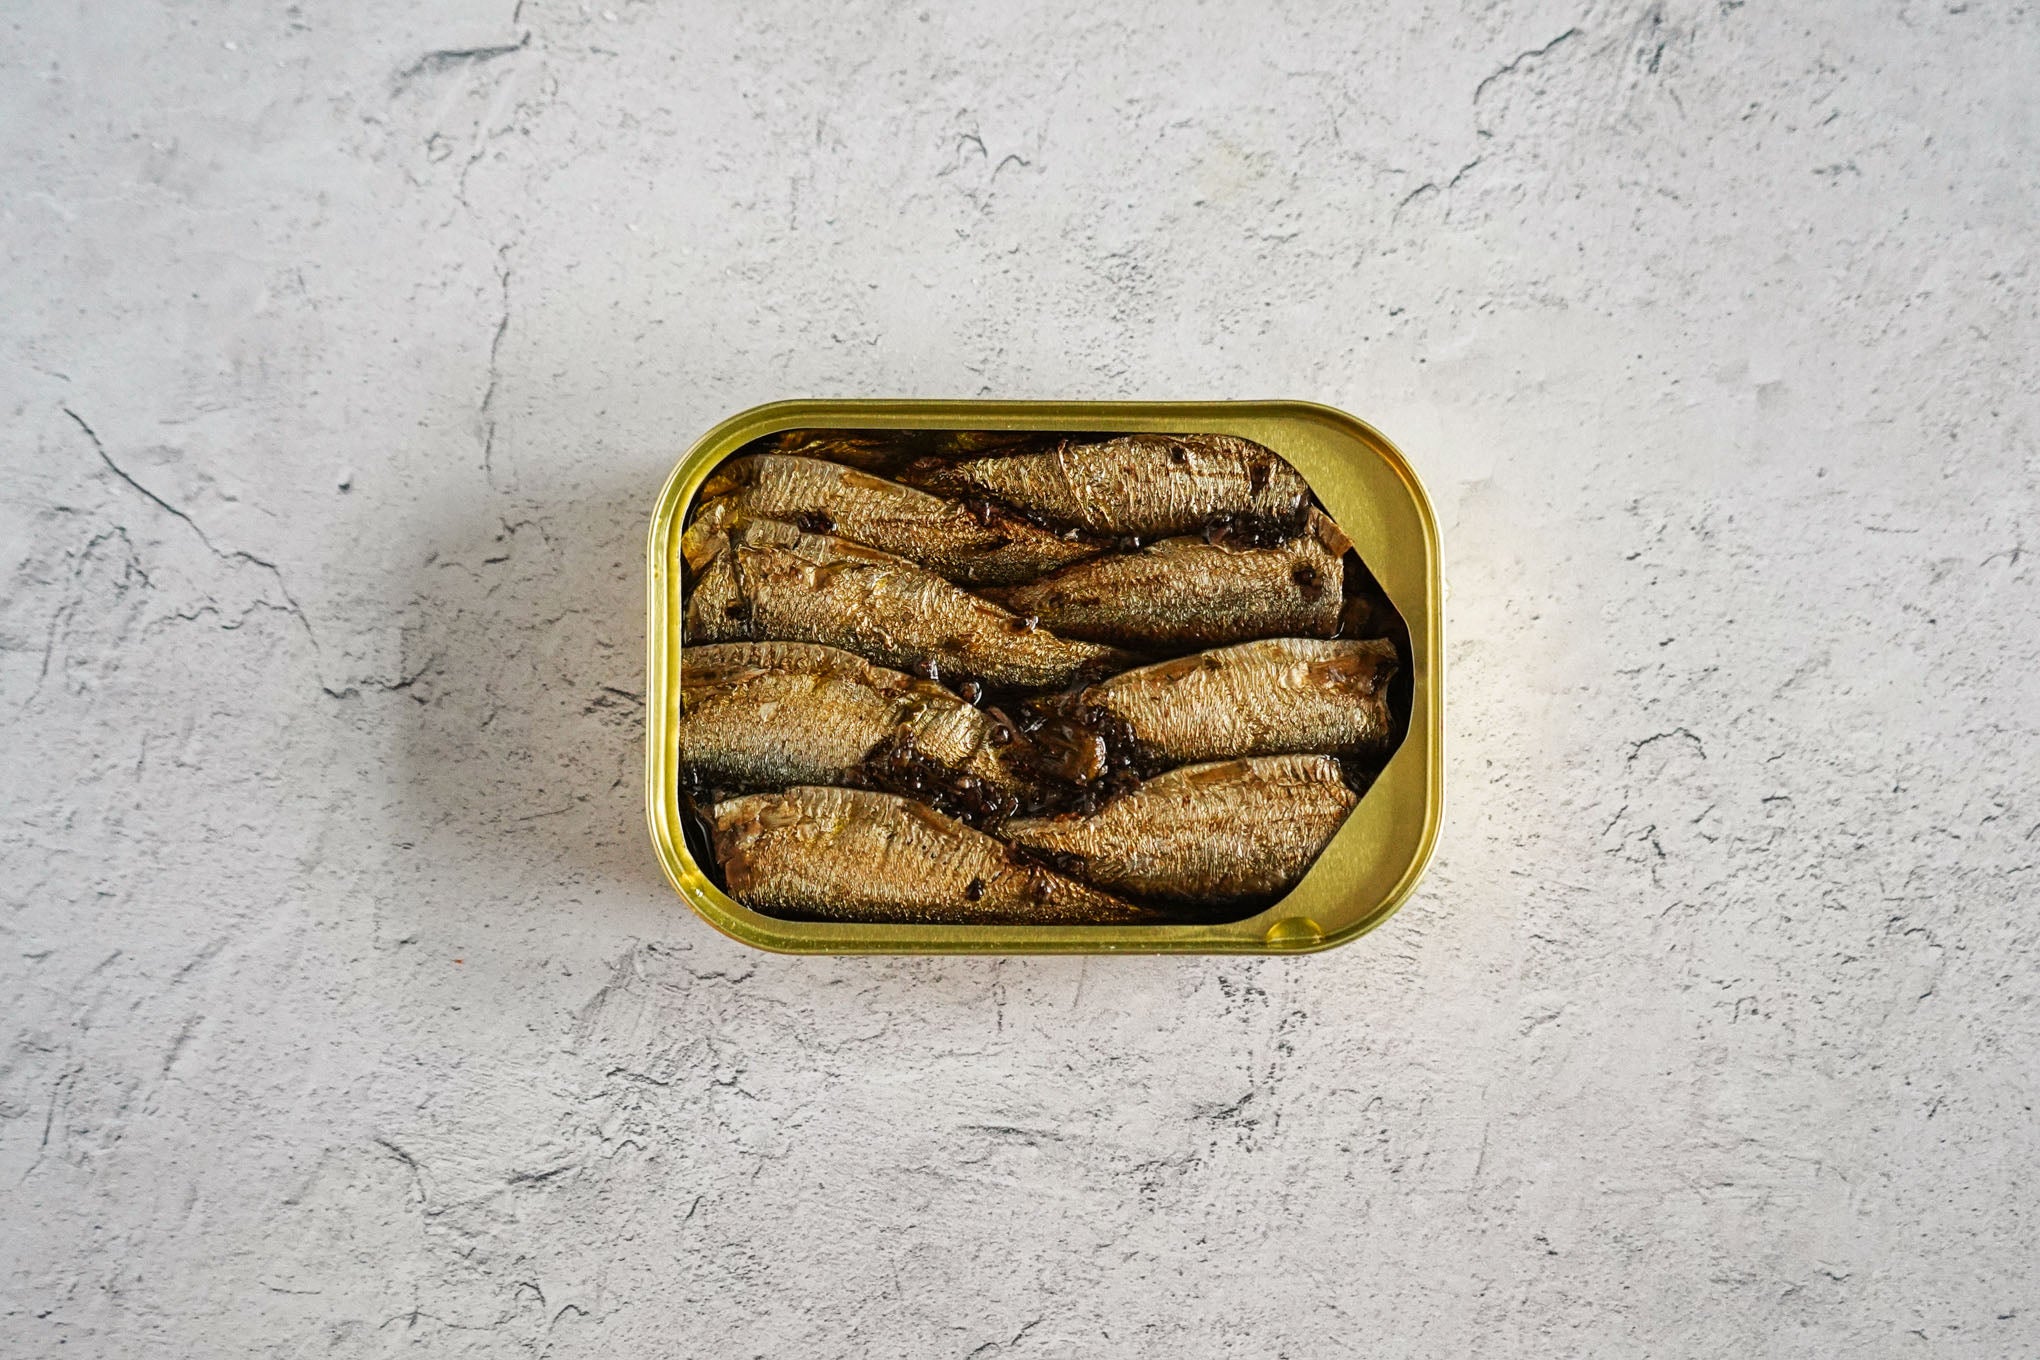 Fangst brisling no 1 Baltic Sea Sprat smoked with heather and chamomile open can